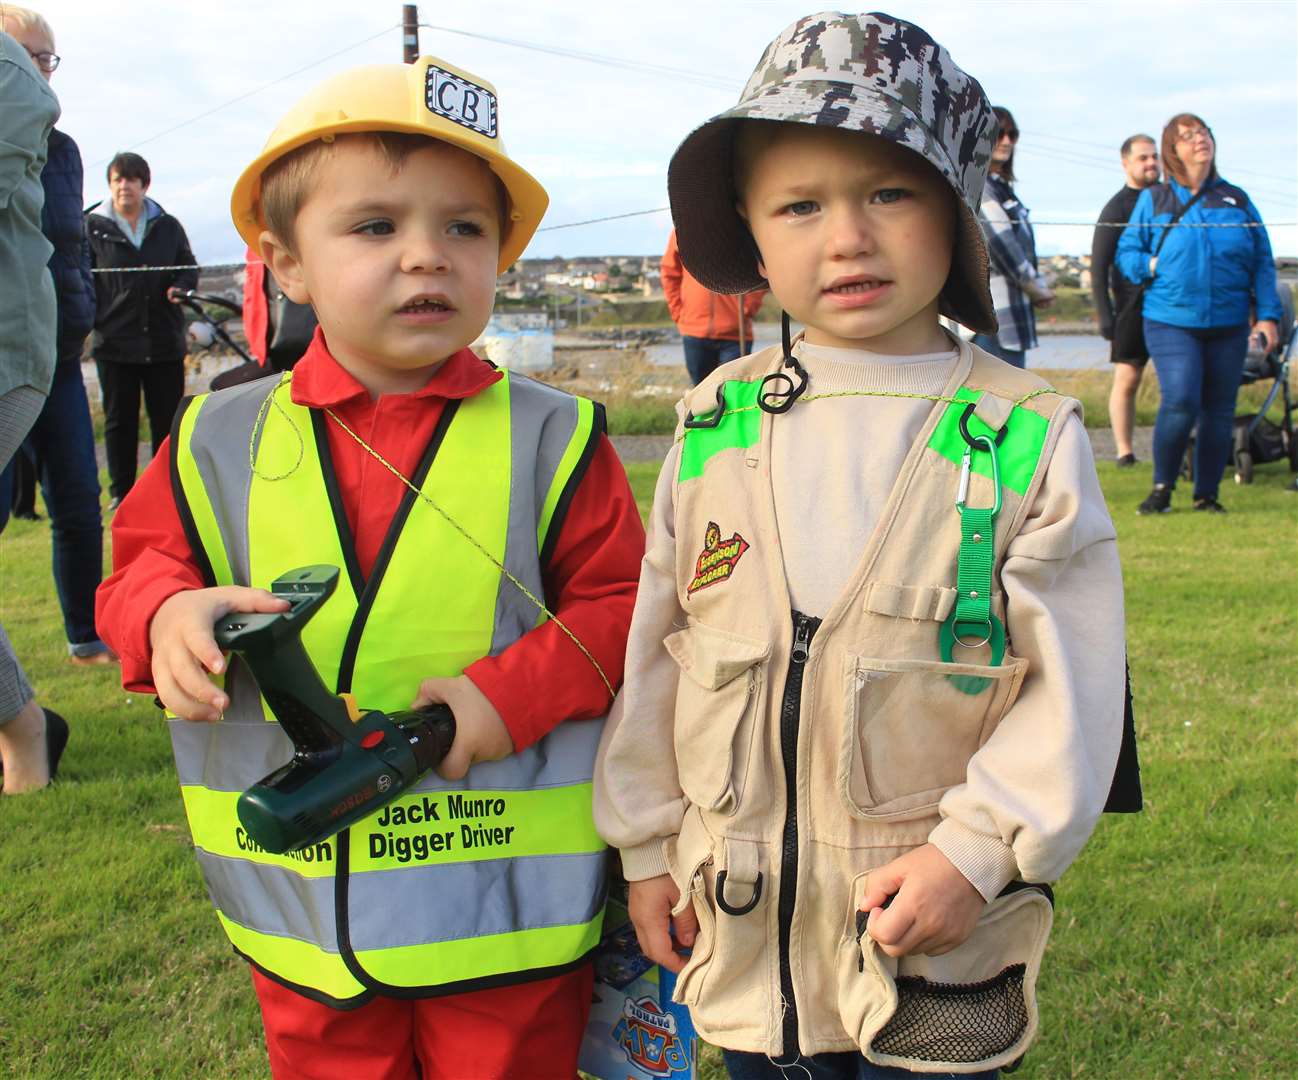 Digger driver Jack Munro and his cousin Theo 'Attenborough' Bremner, both aged three.